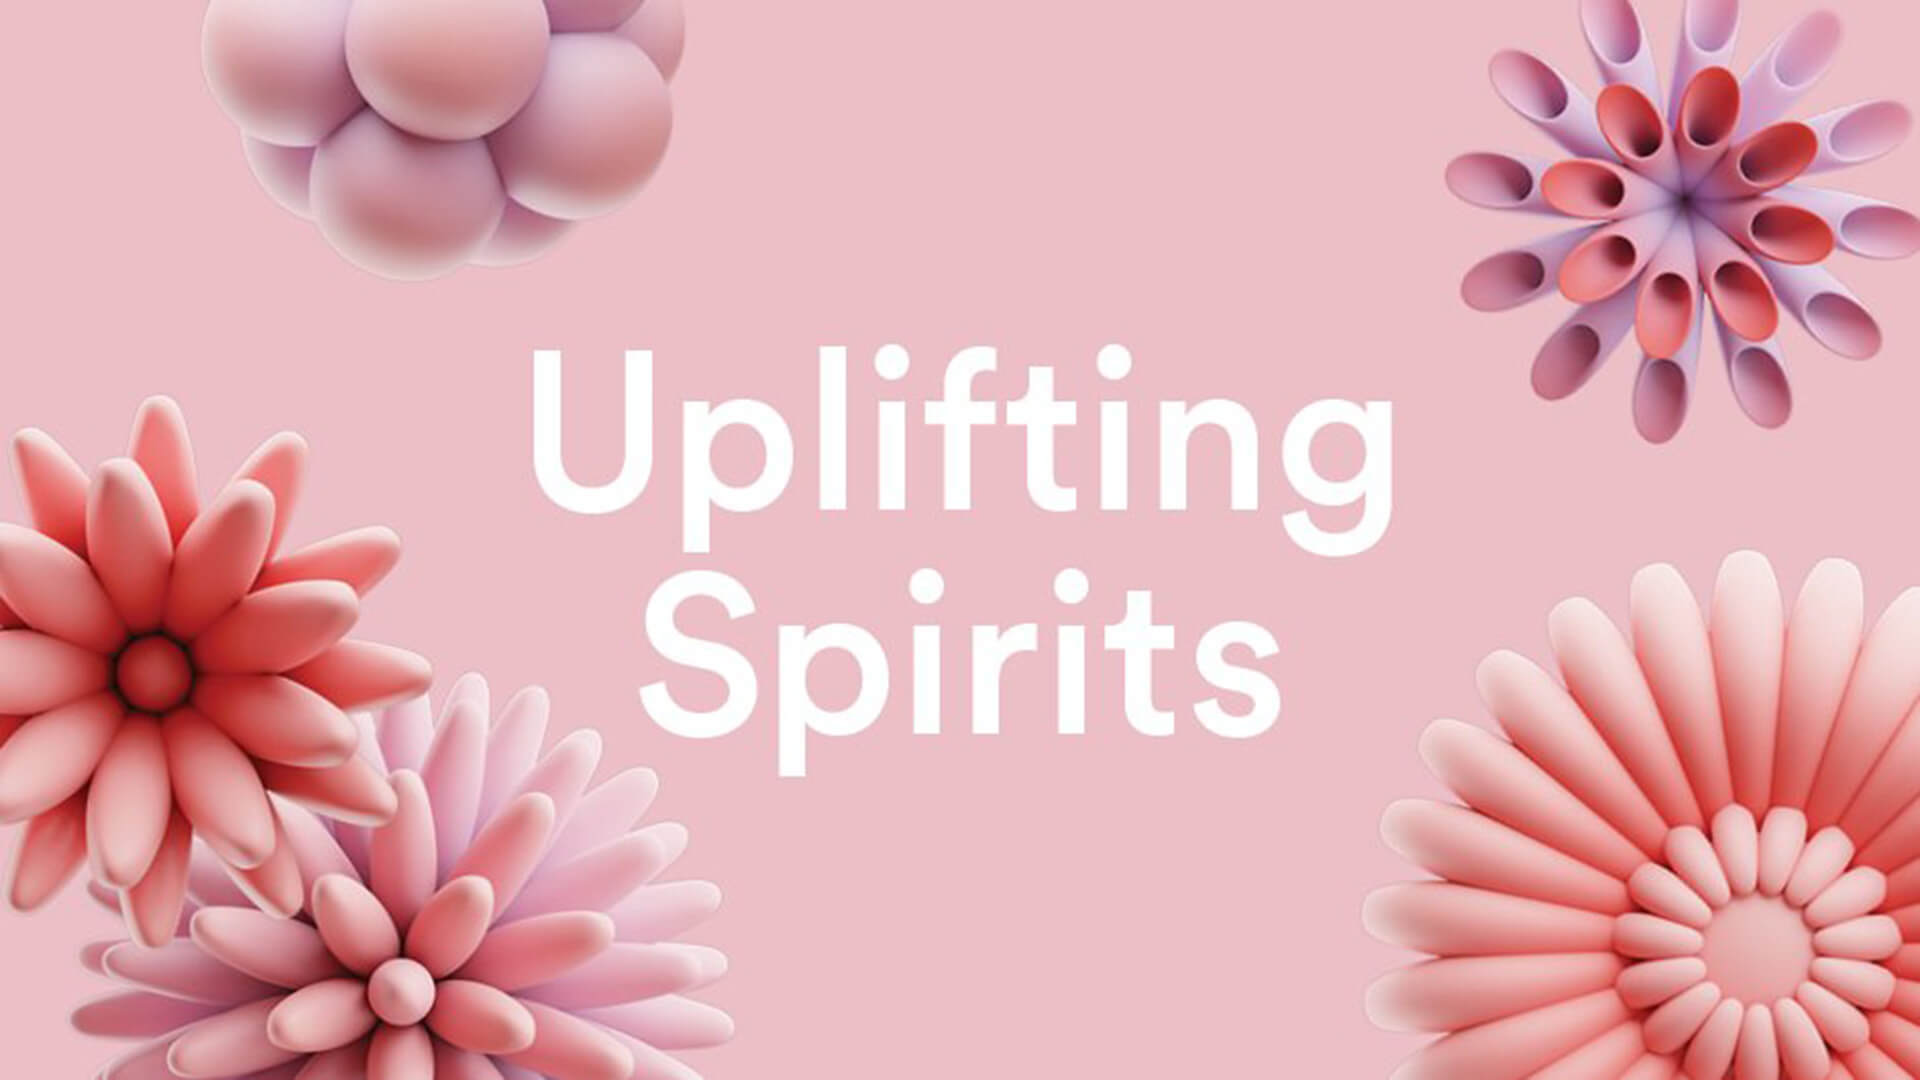 Graphic from Macquarie Center Uplifting Spirits Spring experiential brand activation by VANDAL